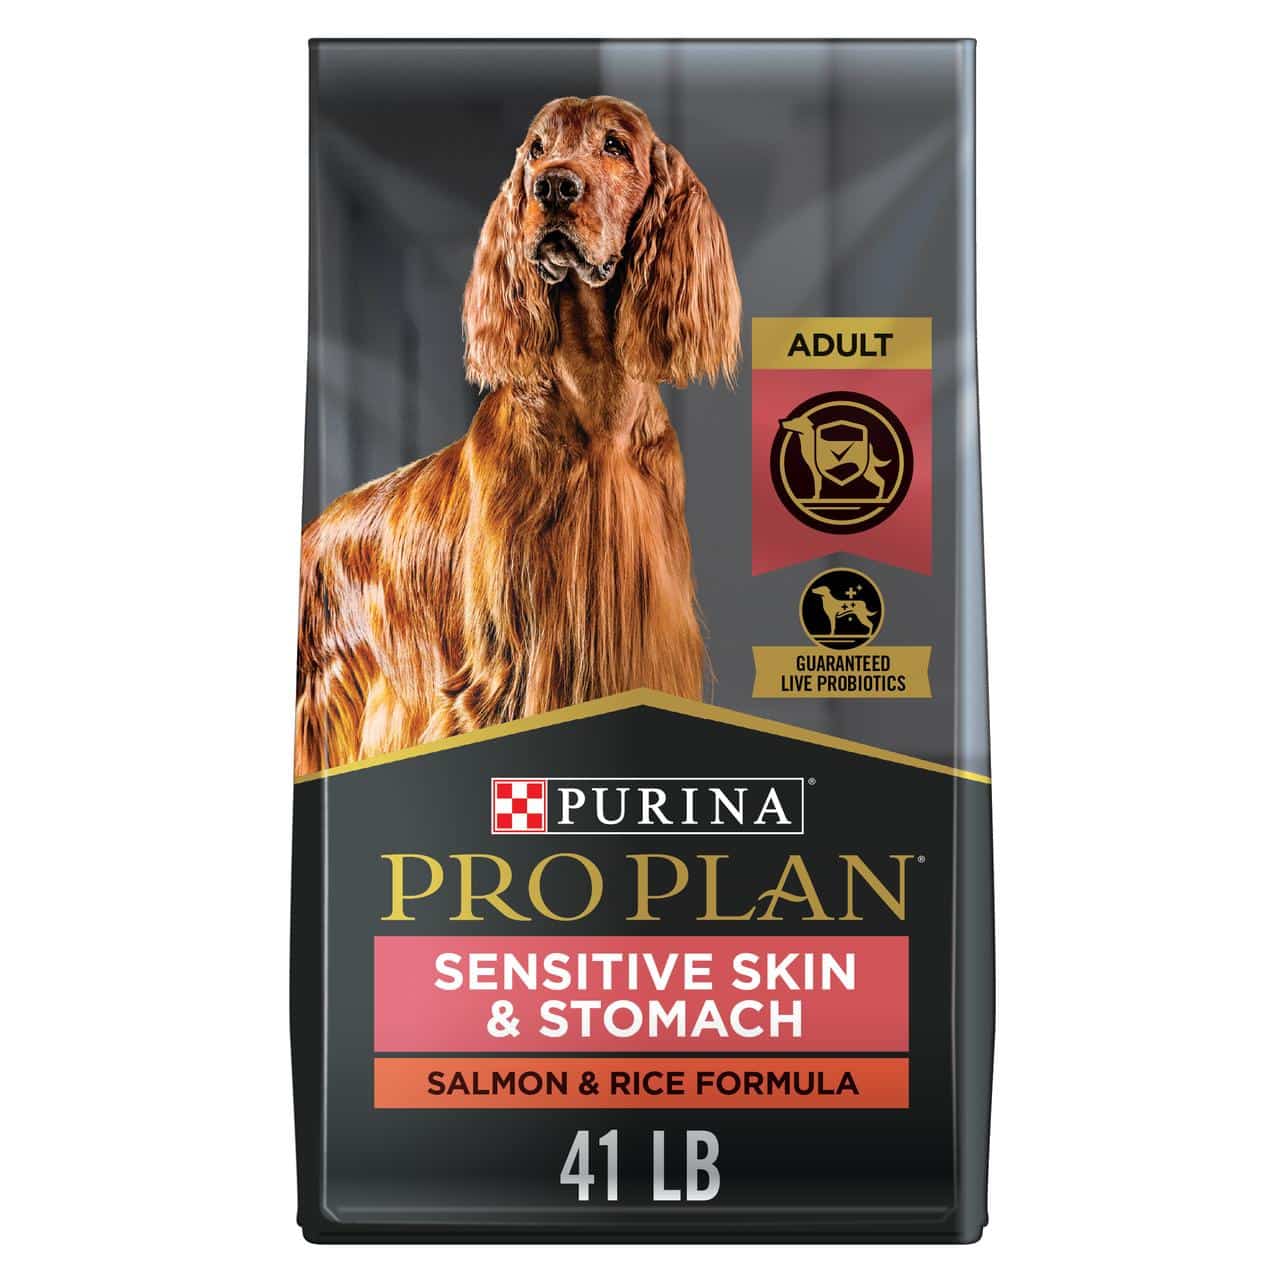 Purina Pro Plan Sensitive Skin and Stomach Dog Food With Probiotics for ...